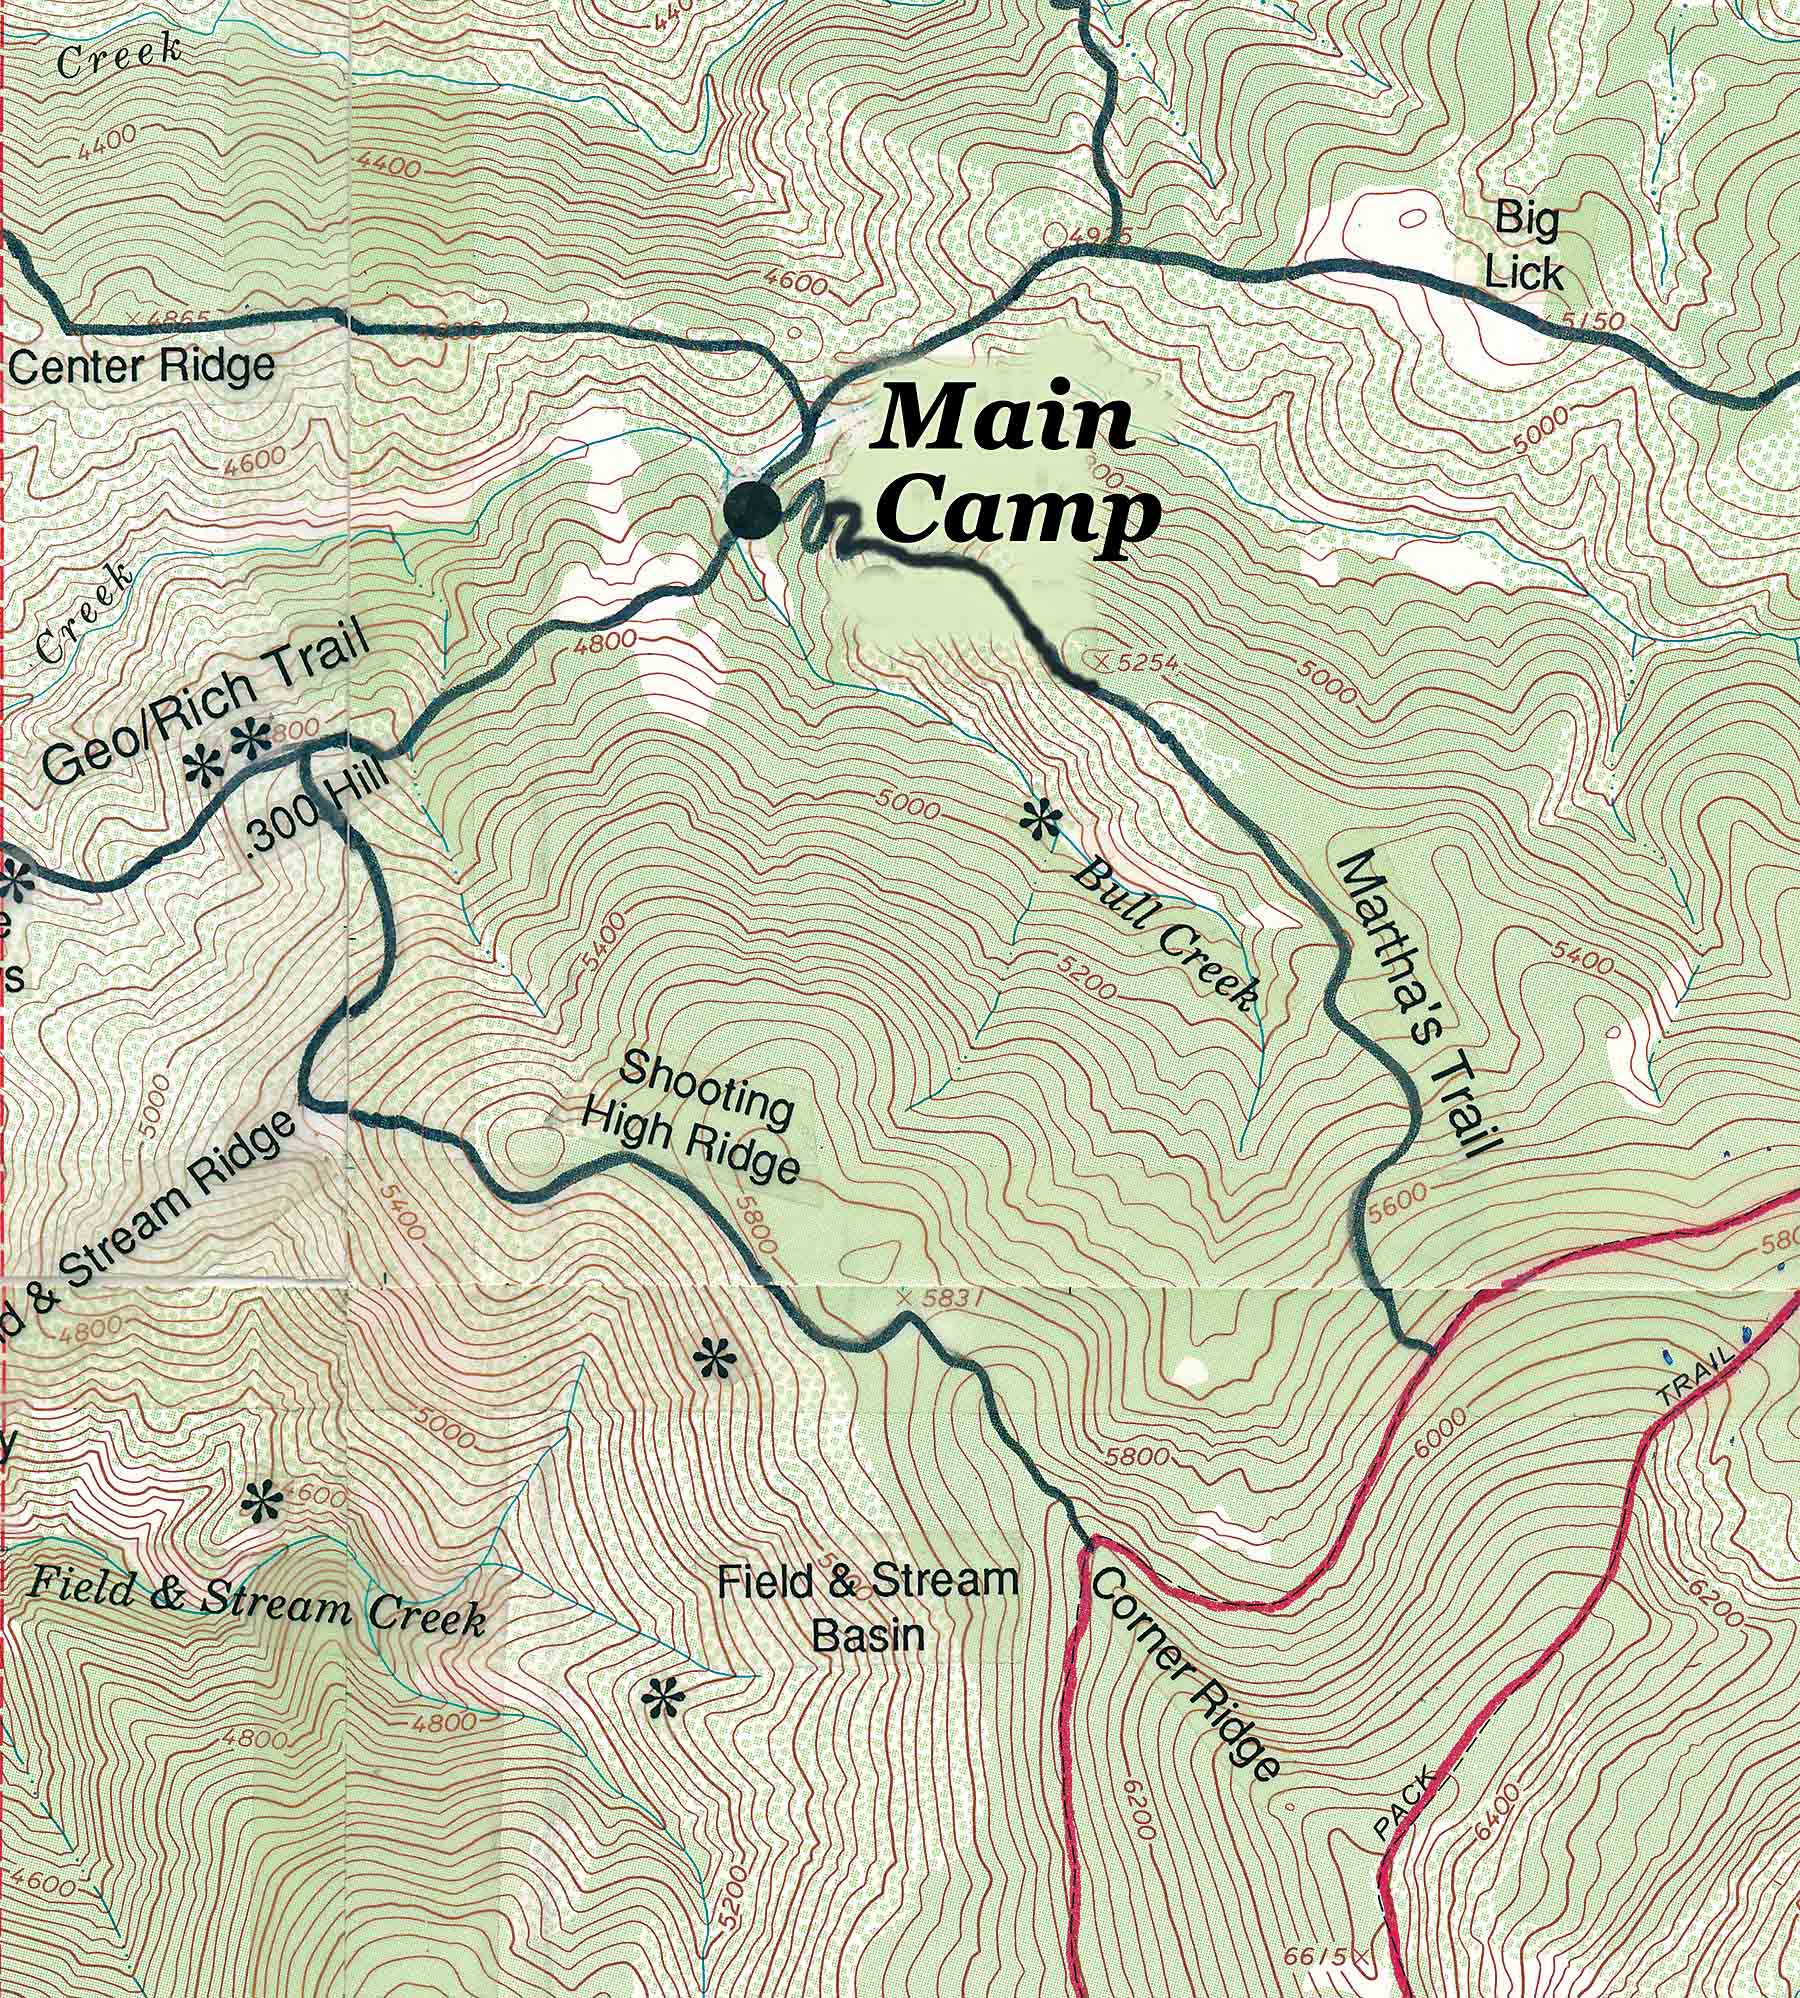 Topo map george uses for horseback hunting